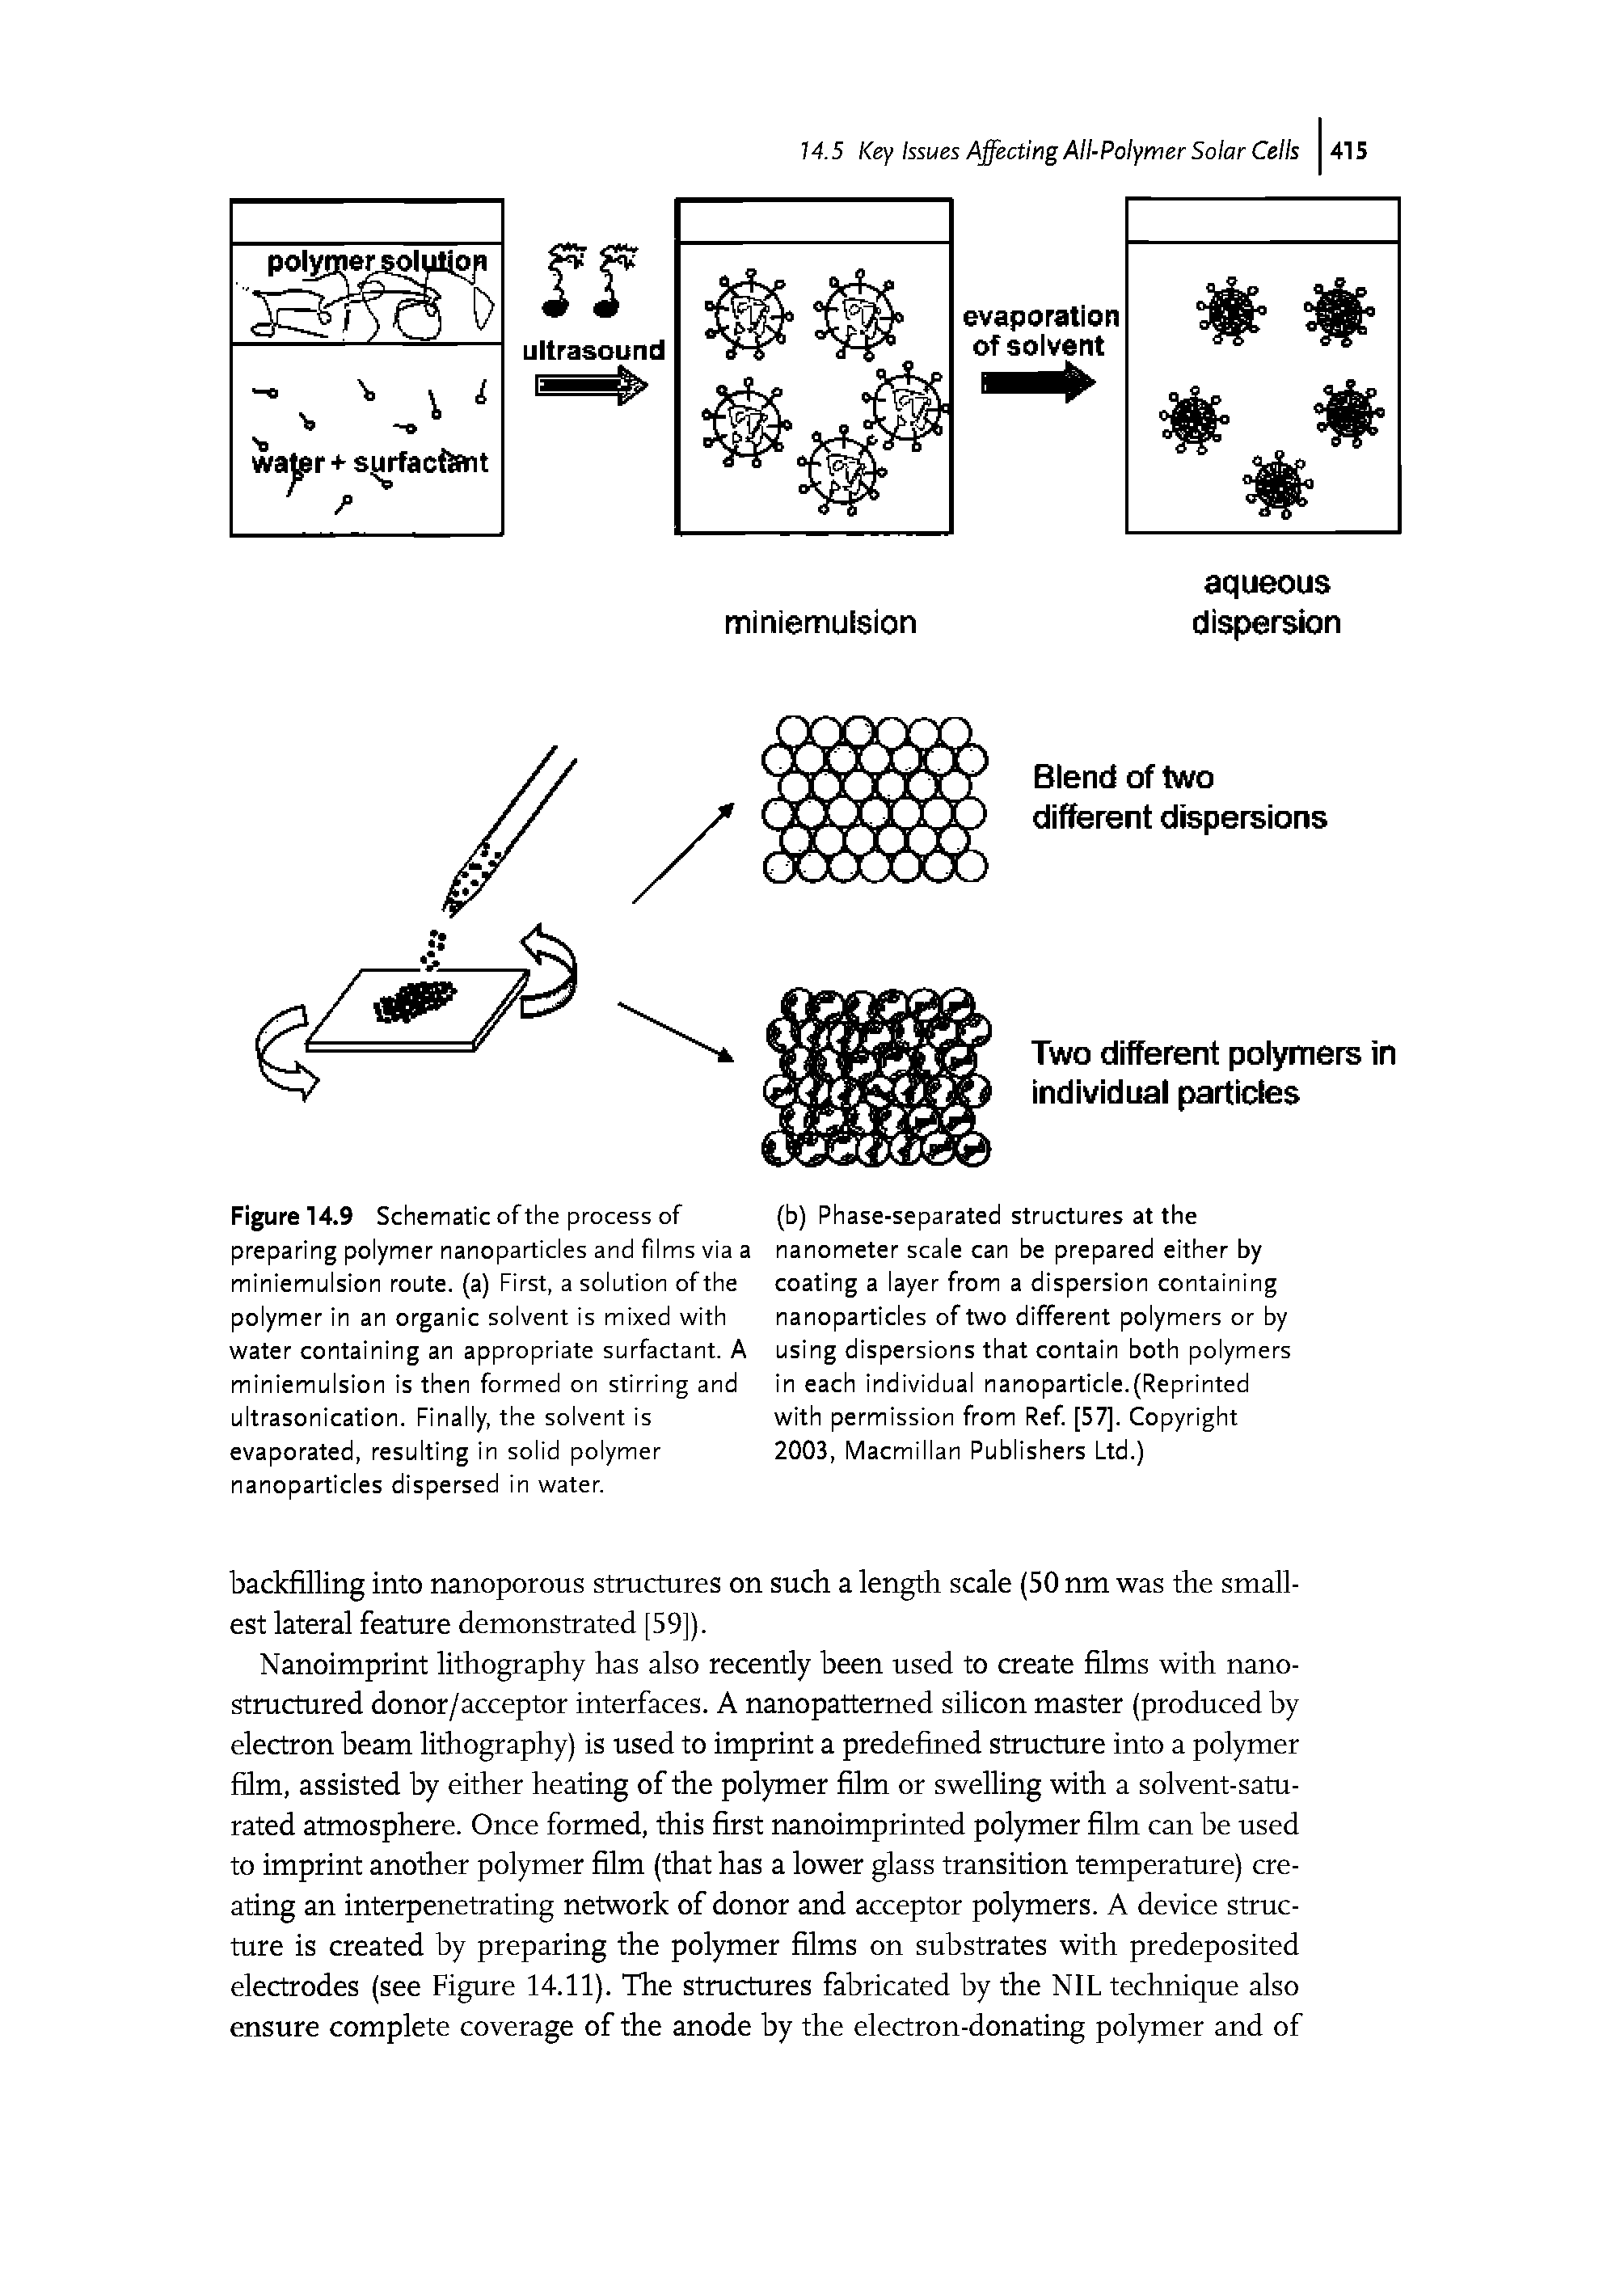 Figure 14.9 Schematic of the process of preparing polymer nanoparticles and films via a miniemulsion route, (a) First, a solution of the polymer in an organic solvent is mixed with water containing an appropriate surfactant. A miniemulsion is then formed on stirring and ultrasonication. Finally, the solvent is evaporated, resulting in solid polymer nanoparticles dispersed in water.